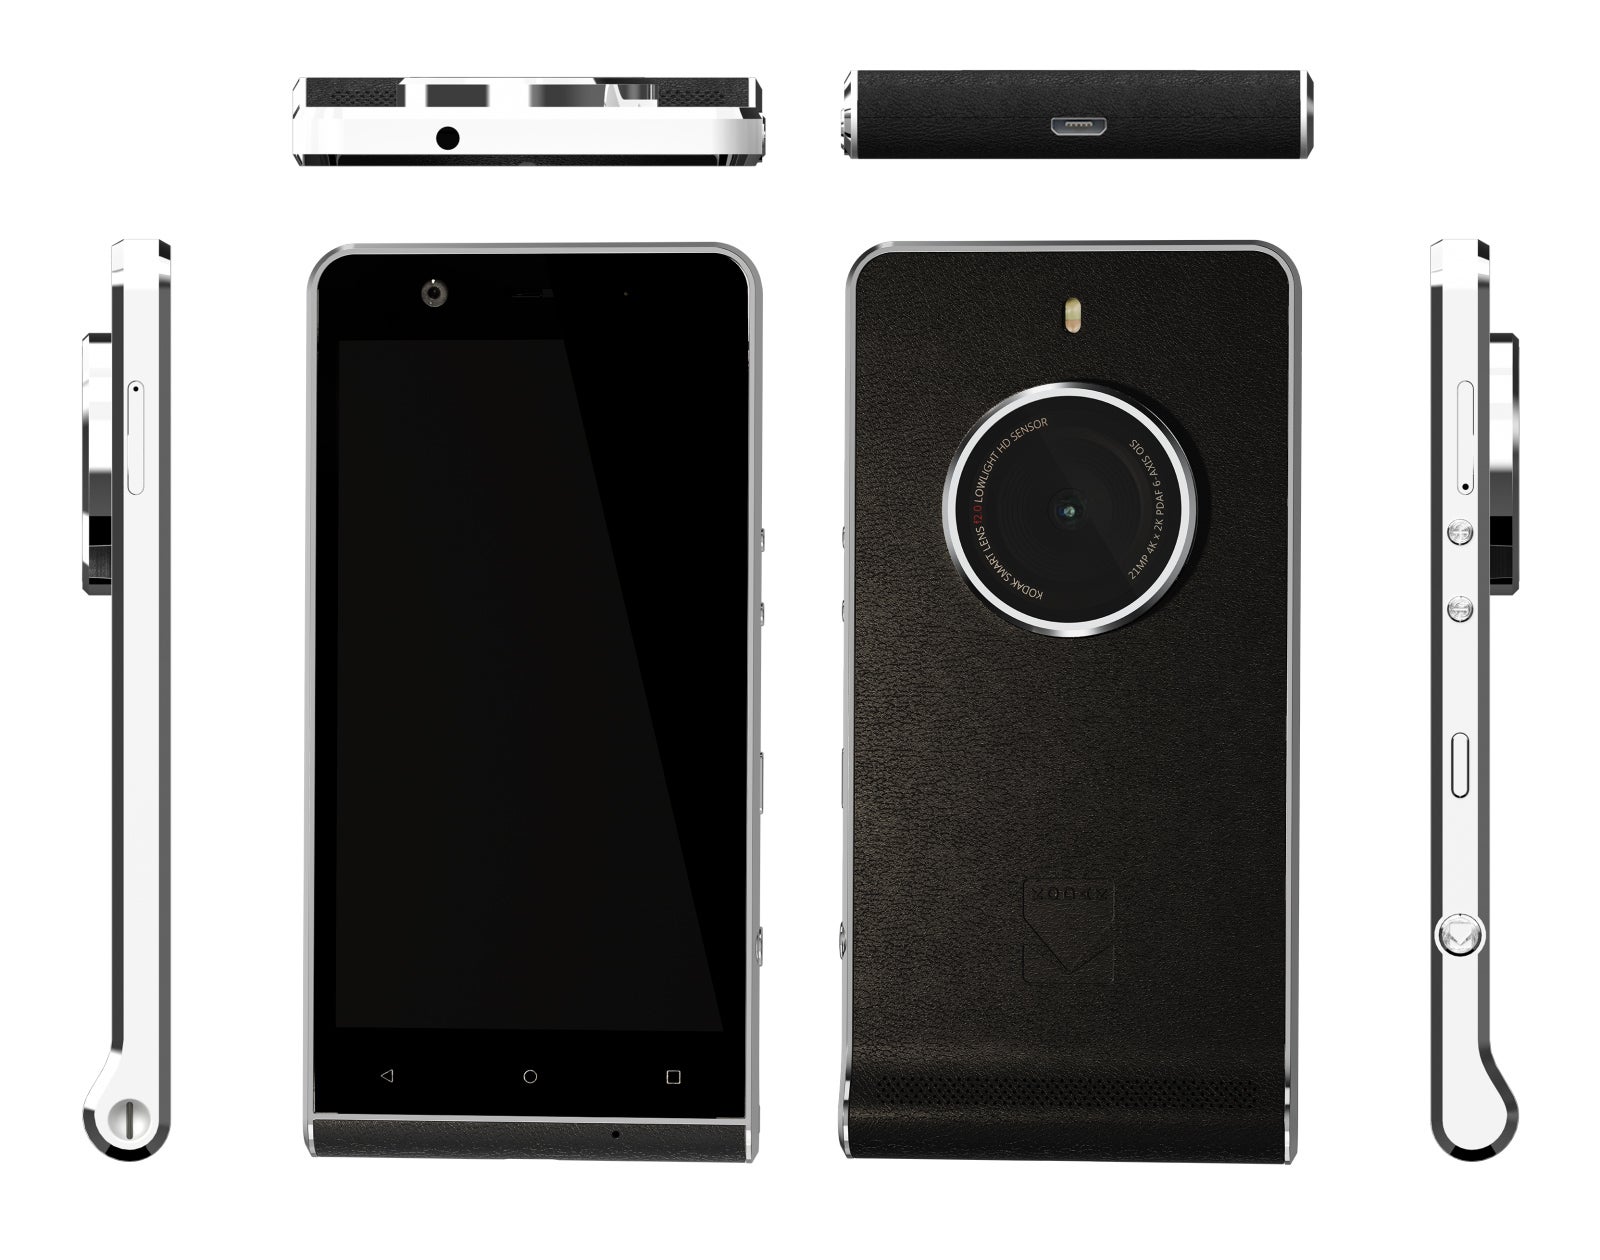 The Kodak Ektra will officially be available for purchase on December 9